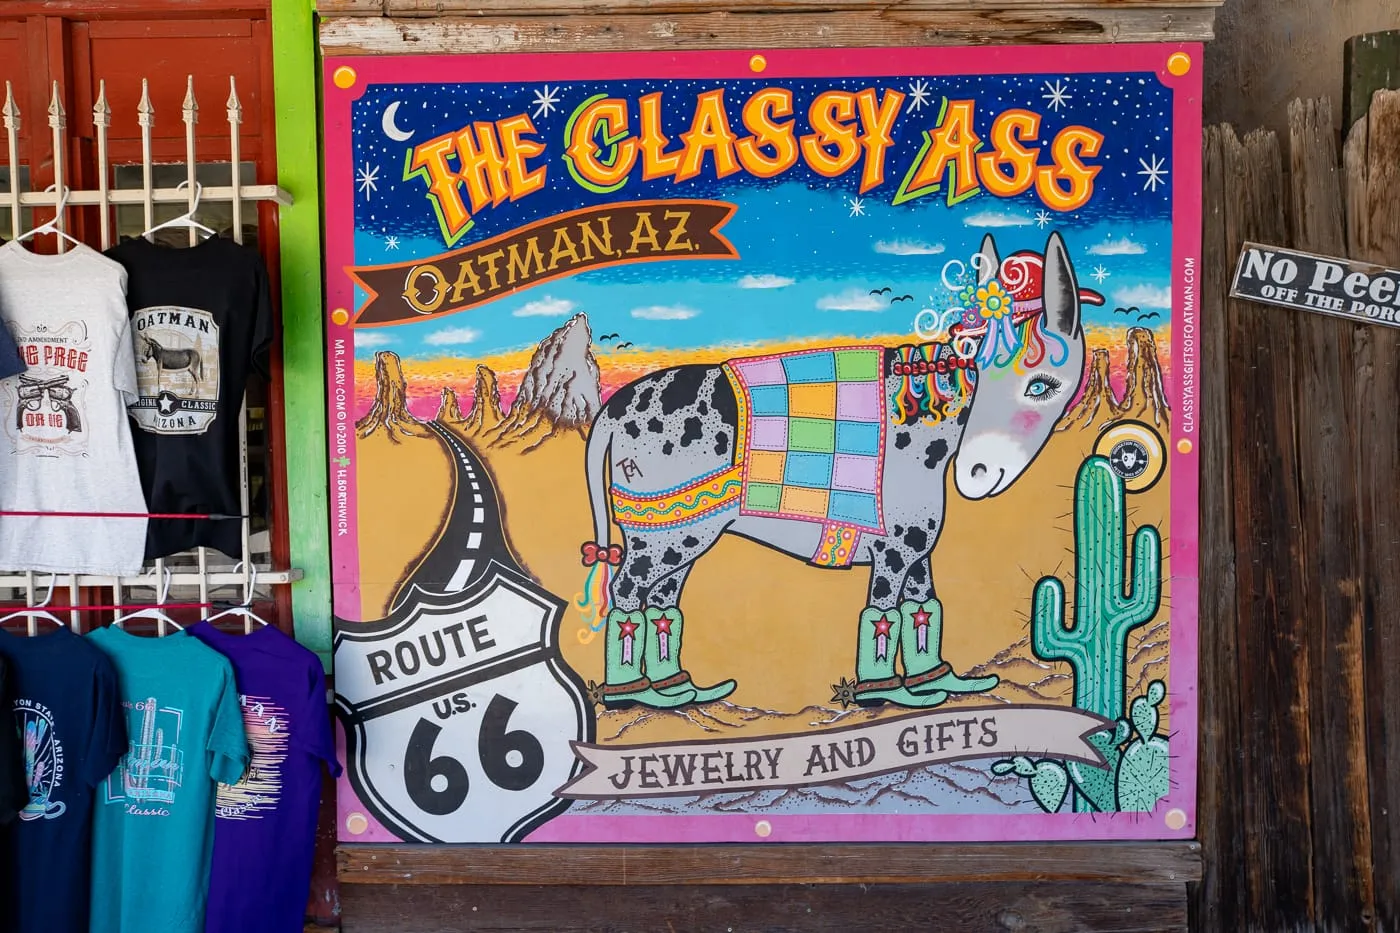 The Classy Ass in Oatman, Arizona: Burros, Gunfights, and Ghost Towns